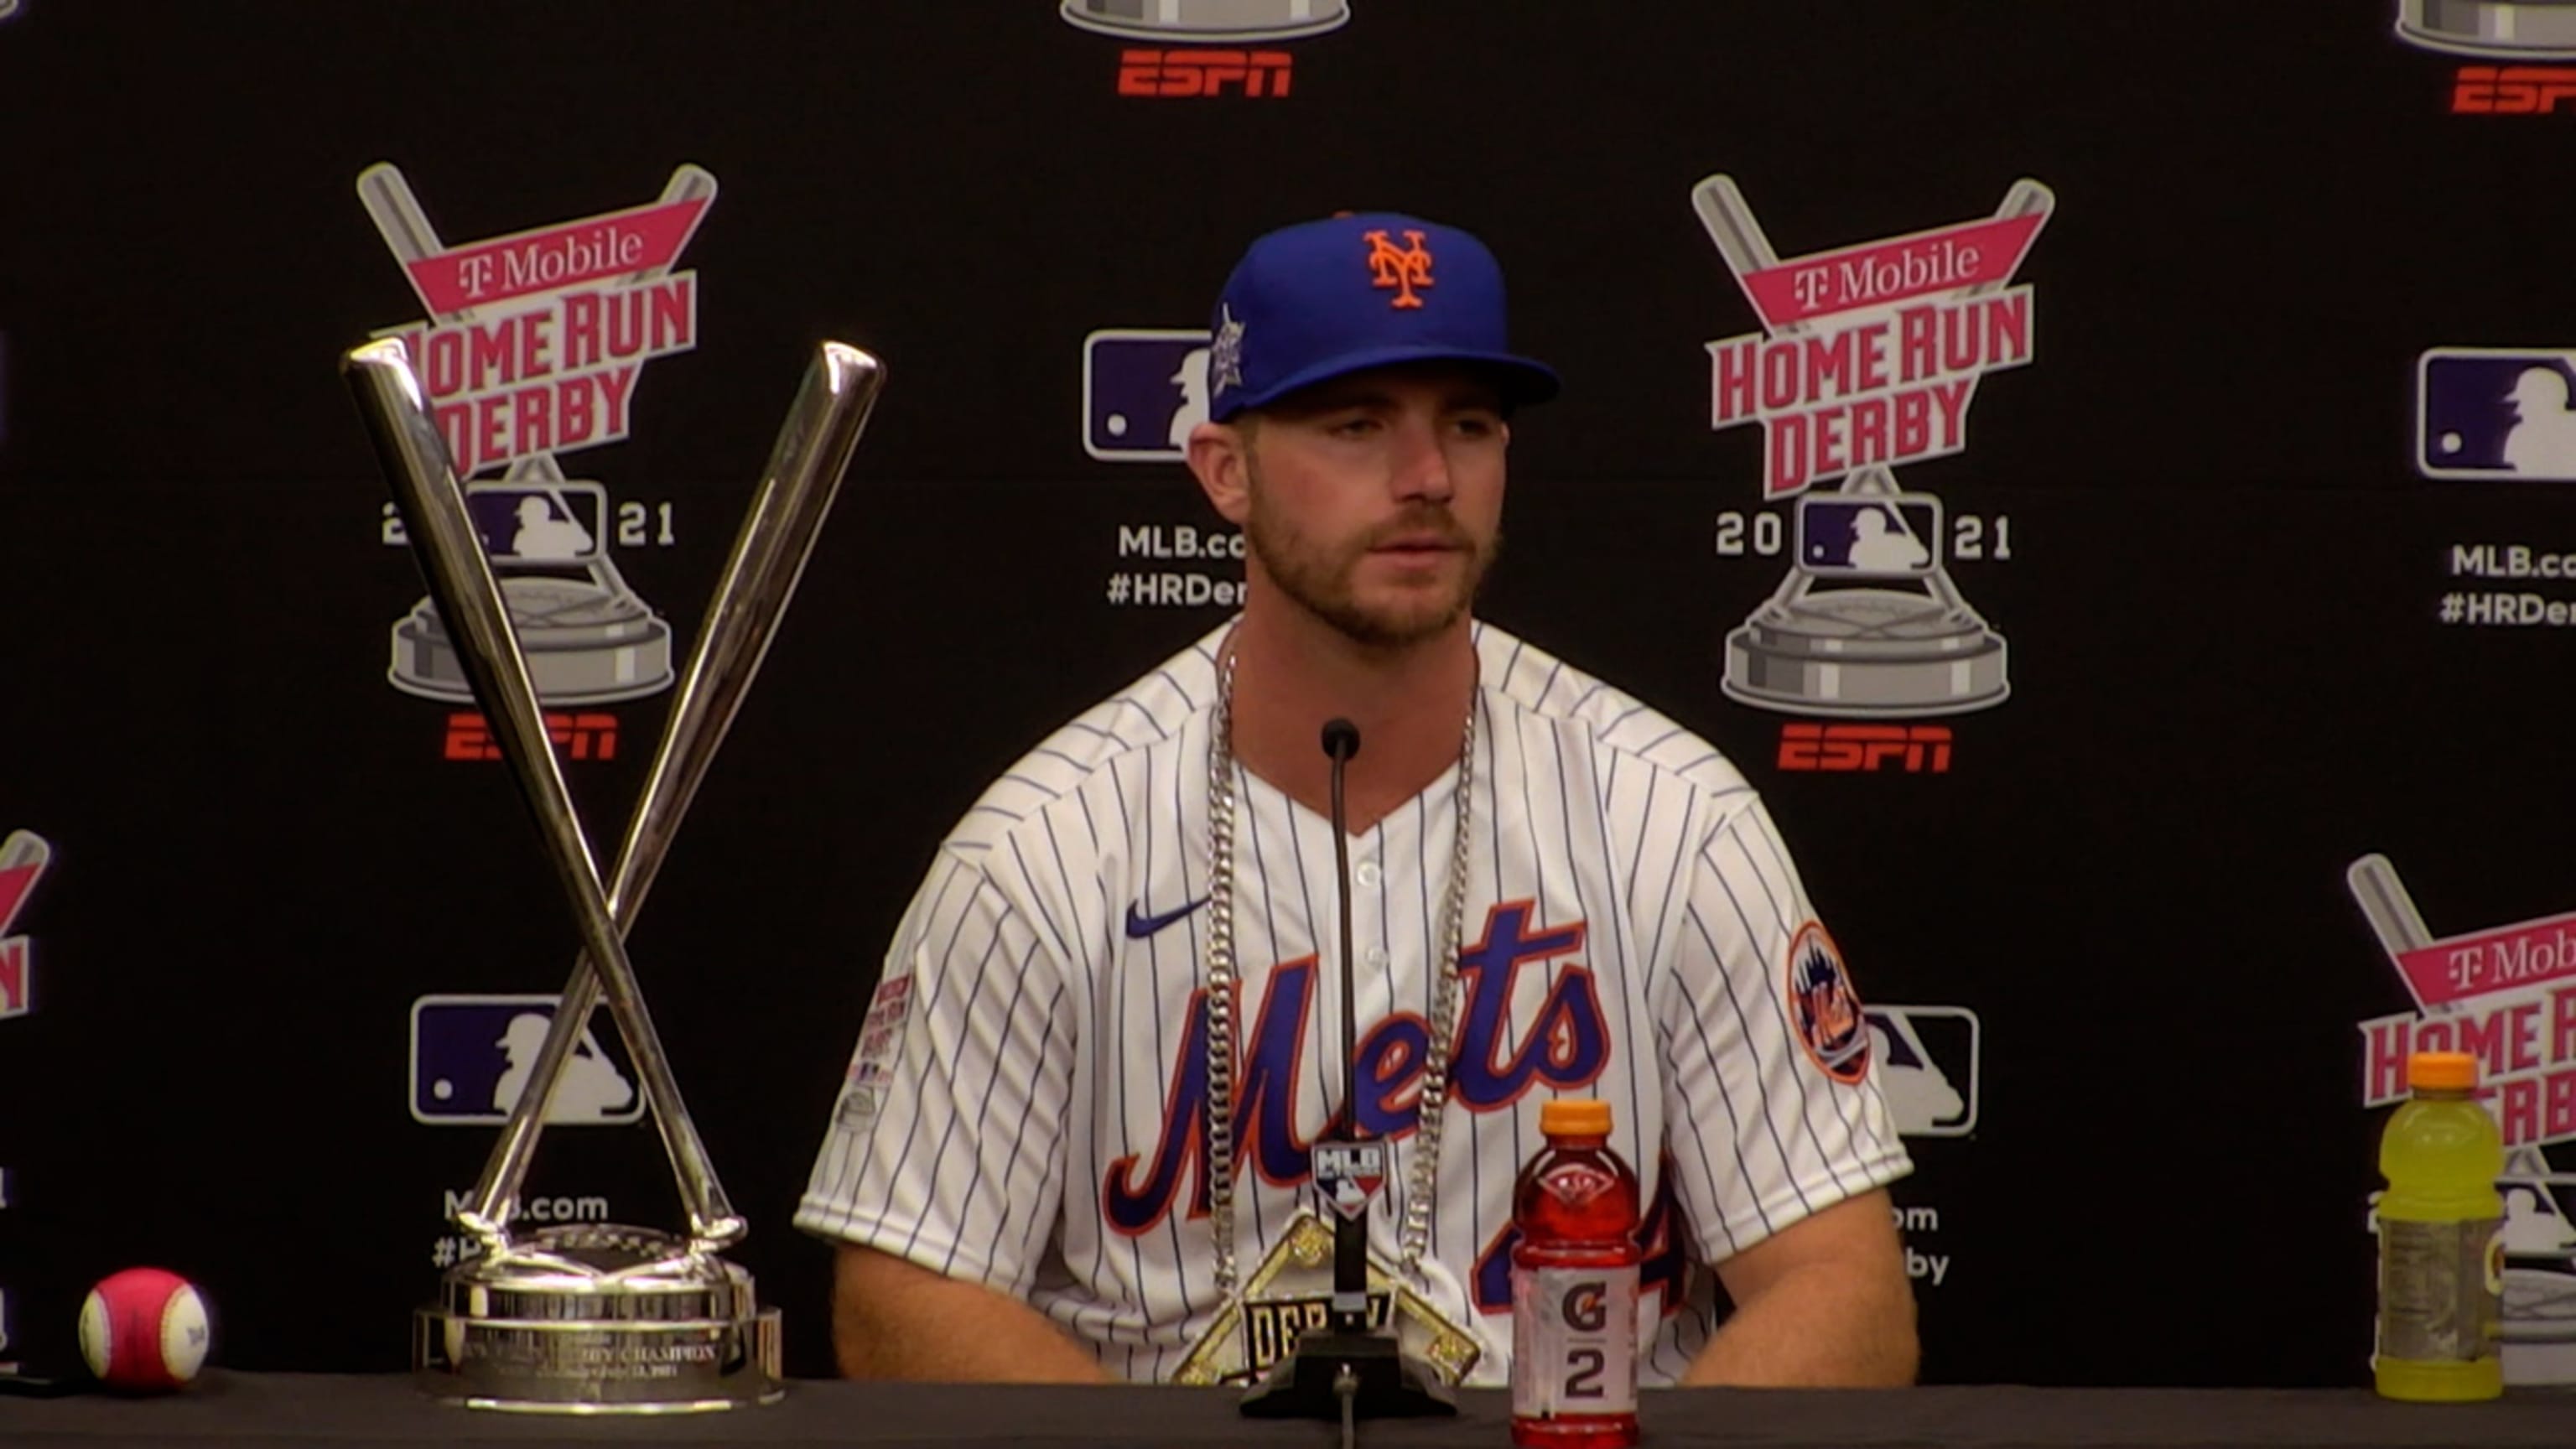 MLB - Pete Alonso is back in the Home Run Derby! Will we